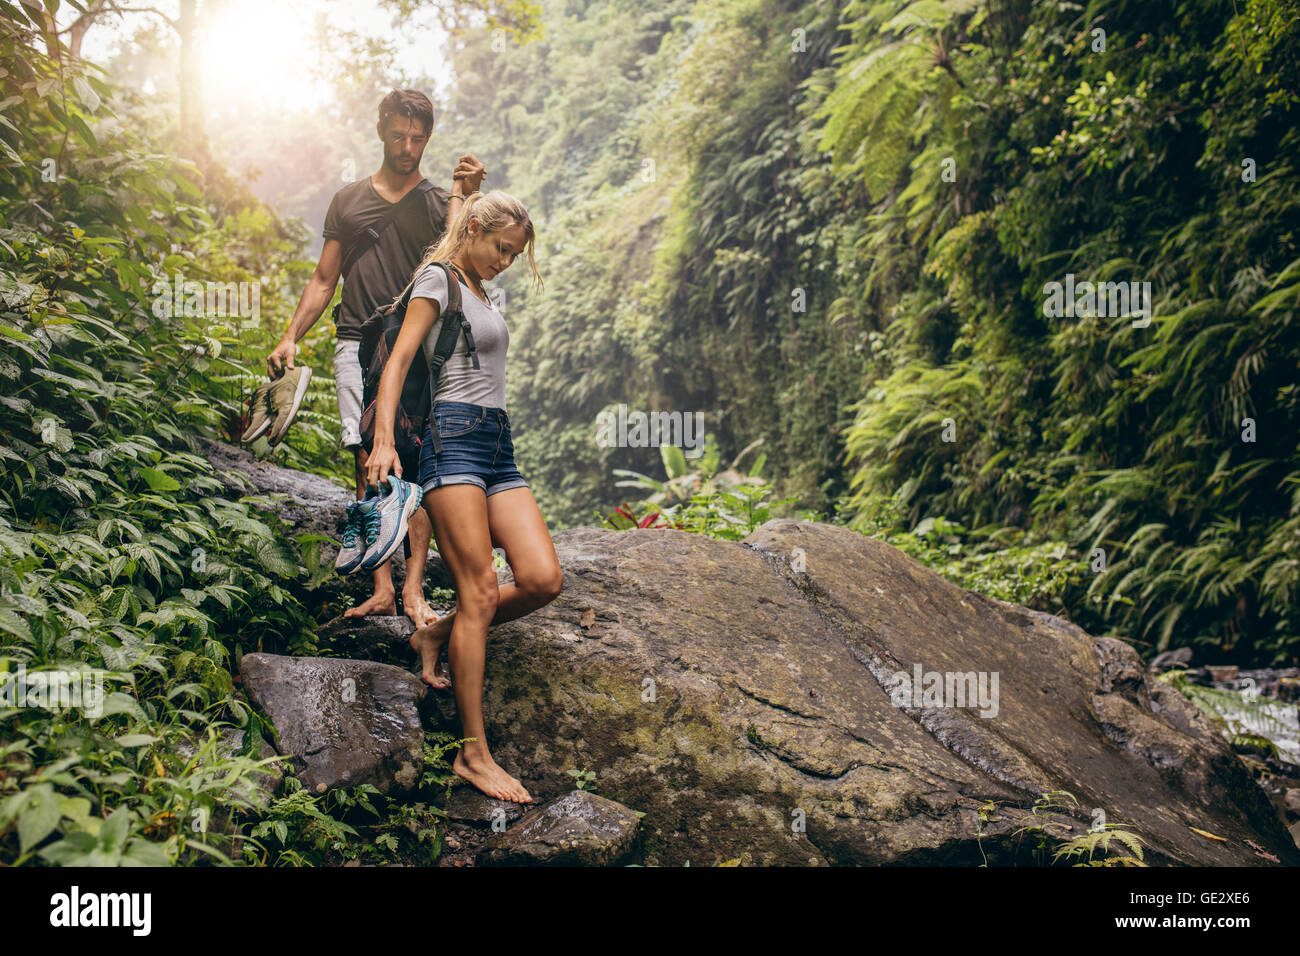 Shot of young couple walking through the mountain trail. Man and woman hiking on mountain trail barefoot. Stock Photo